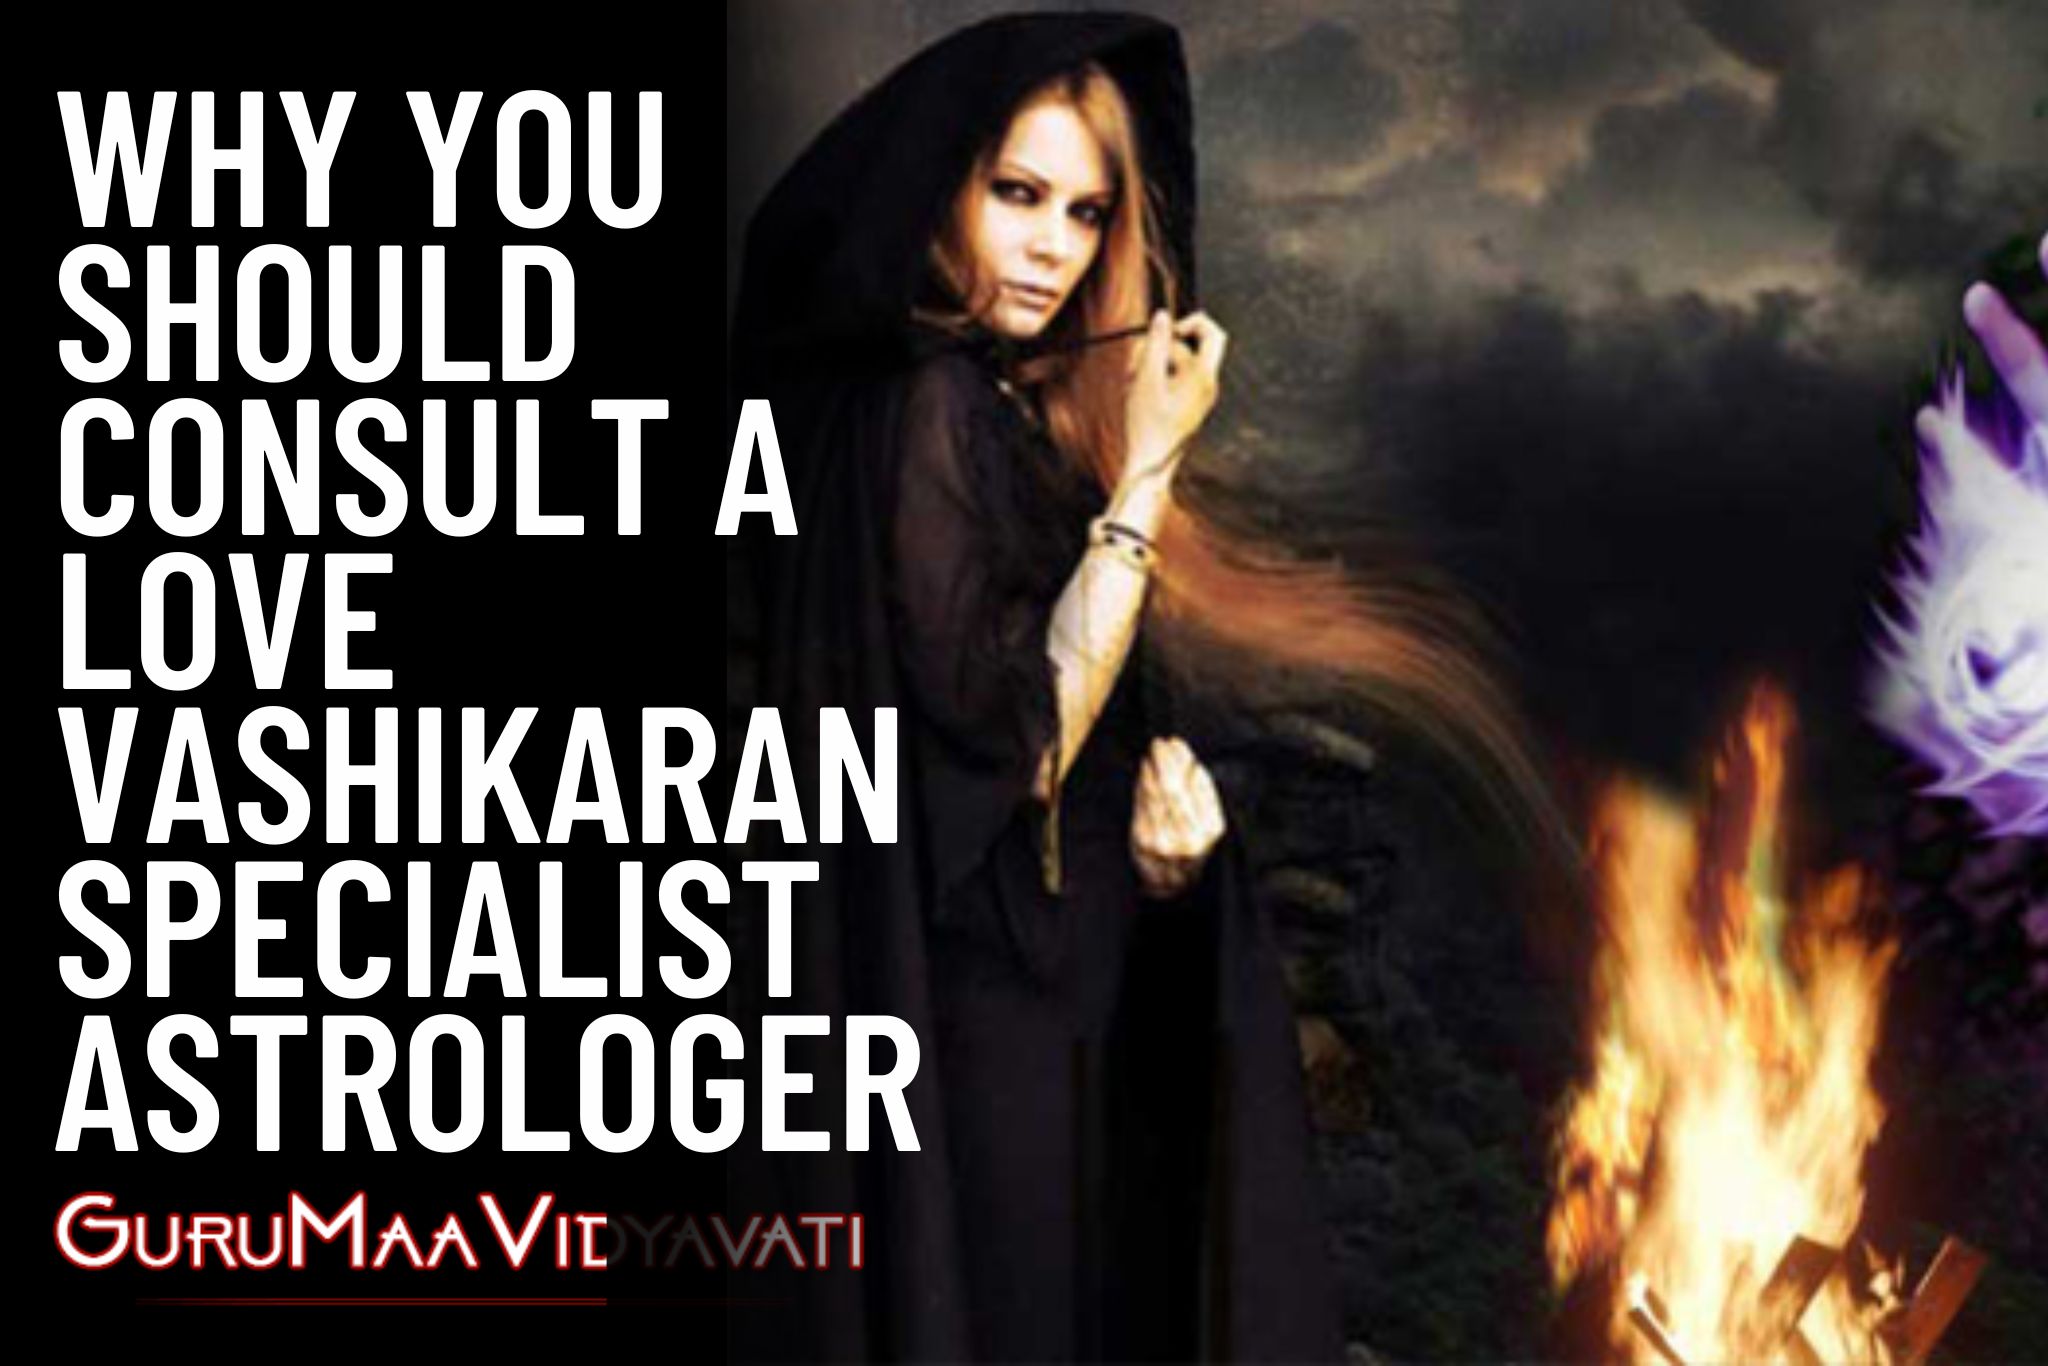 Why You Should Consult a Love Vashikaran Specialist Astrologer